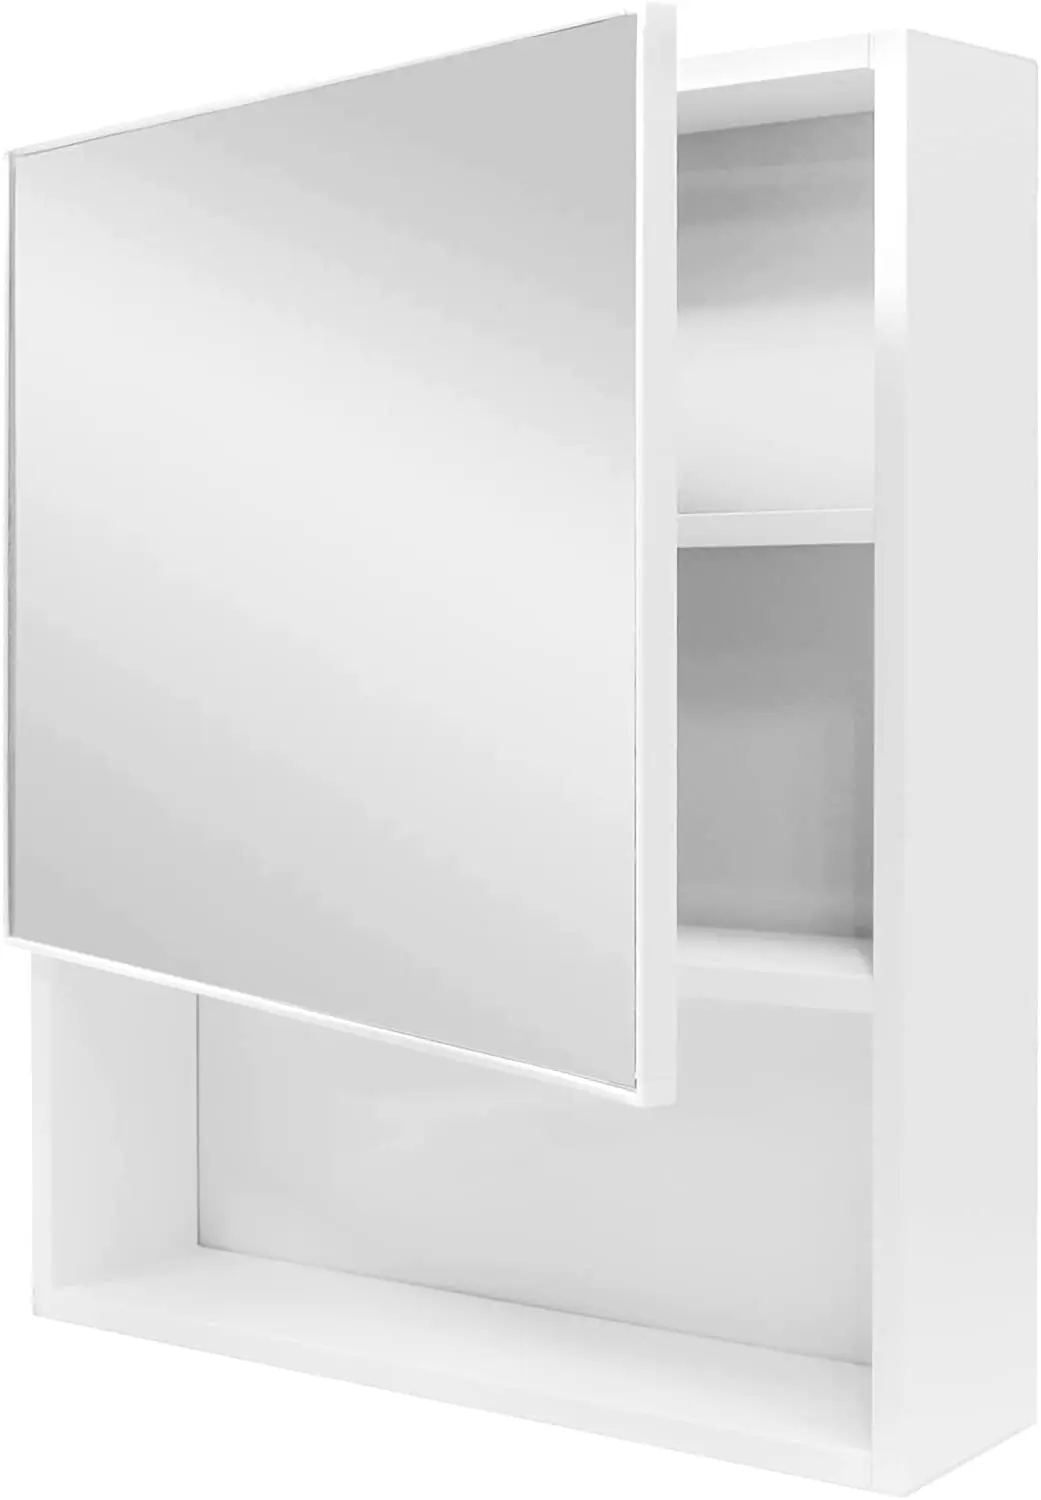 Modern white design wall mounted storage and display mirrored bathroom cabinet for bathroom furniture